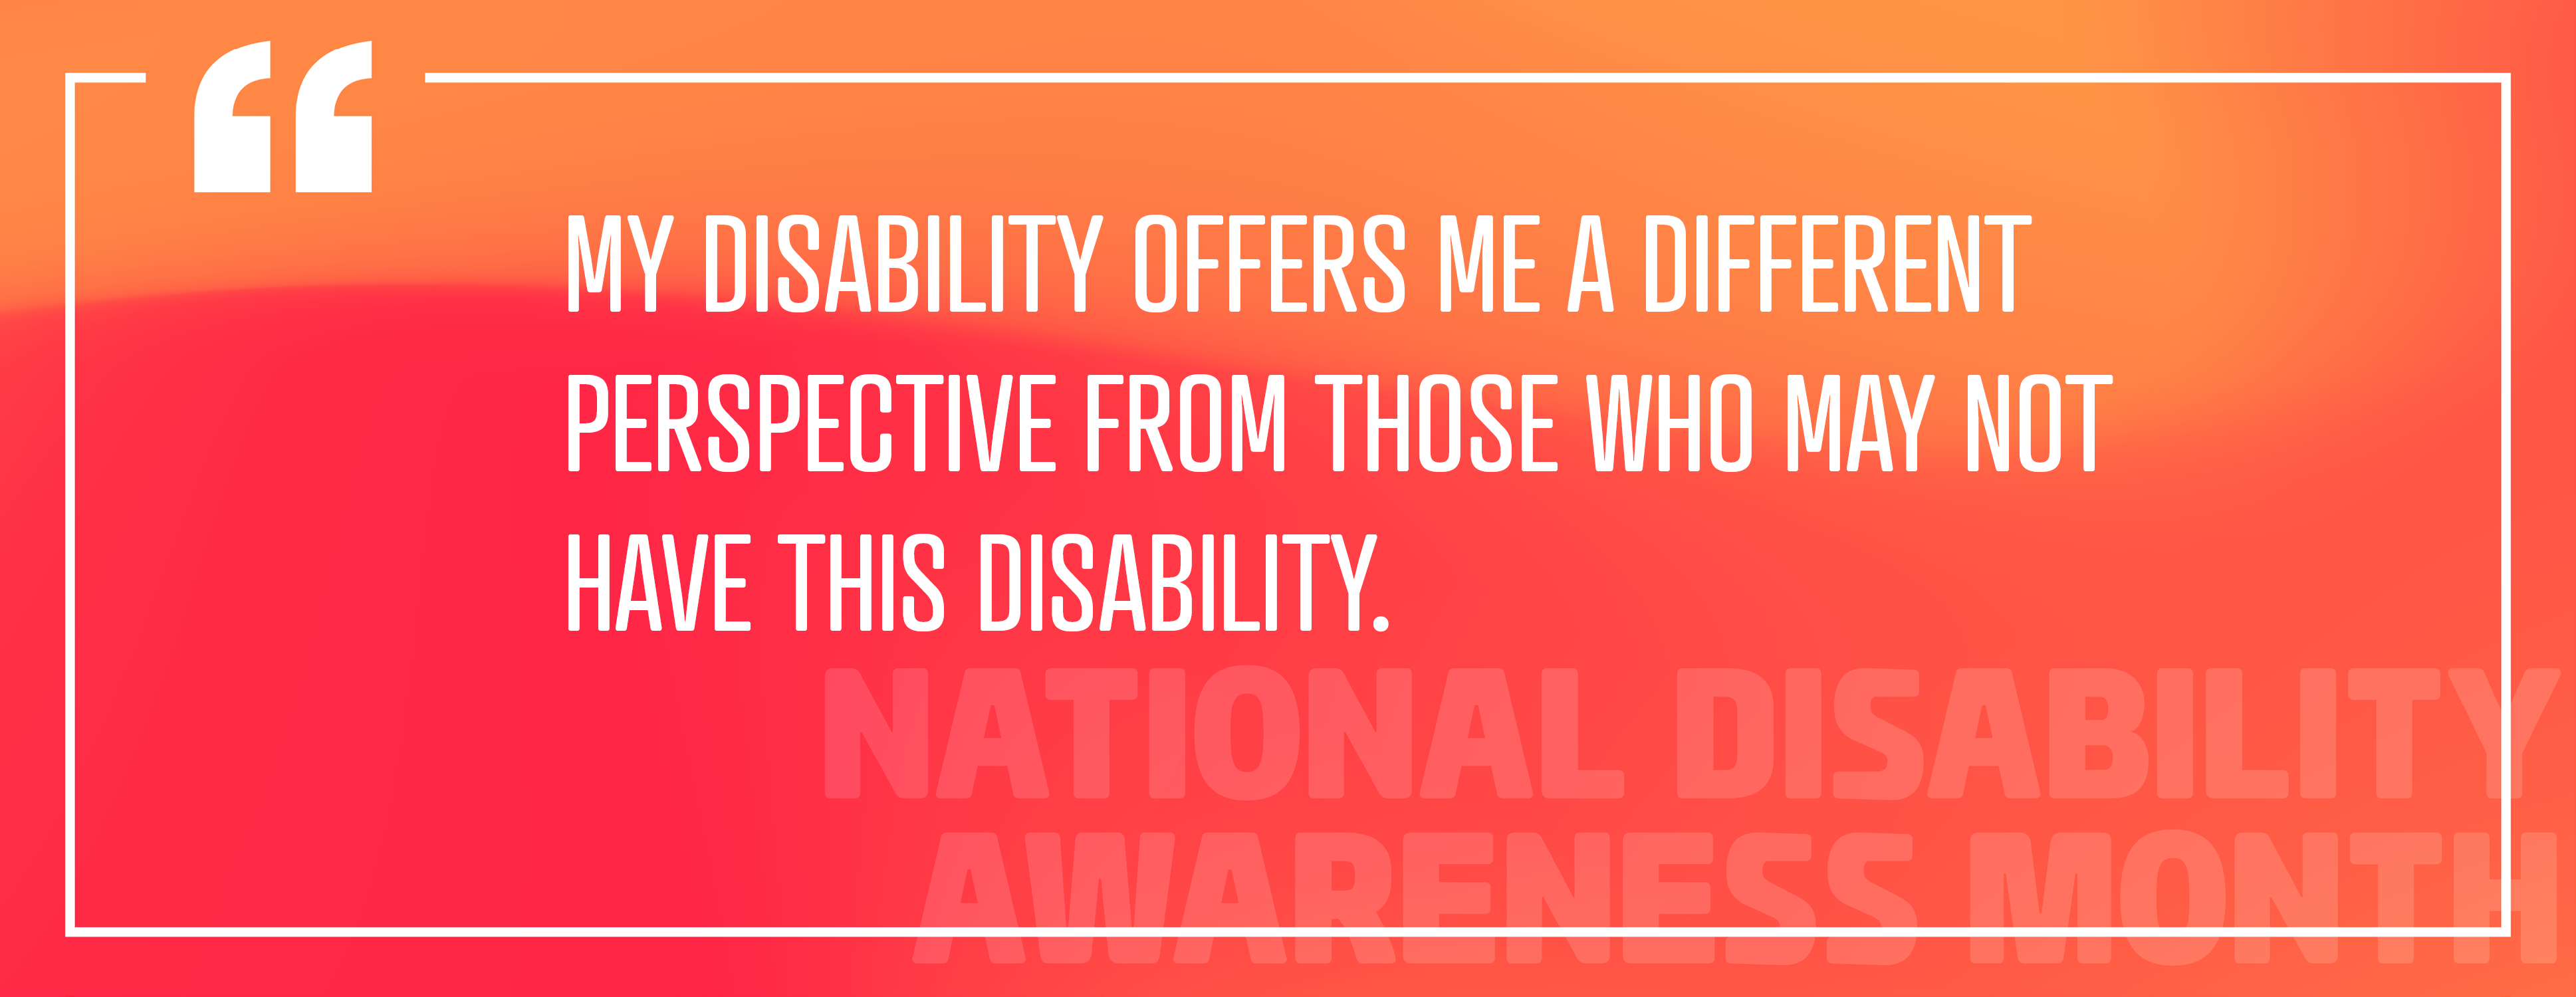 Image 2: "My disability offers me a different perspective from those who may not have this disability."